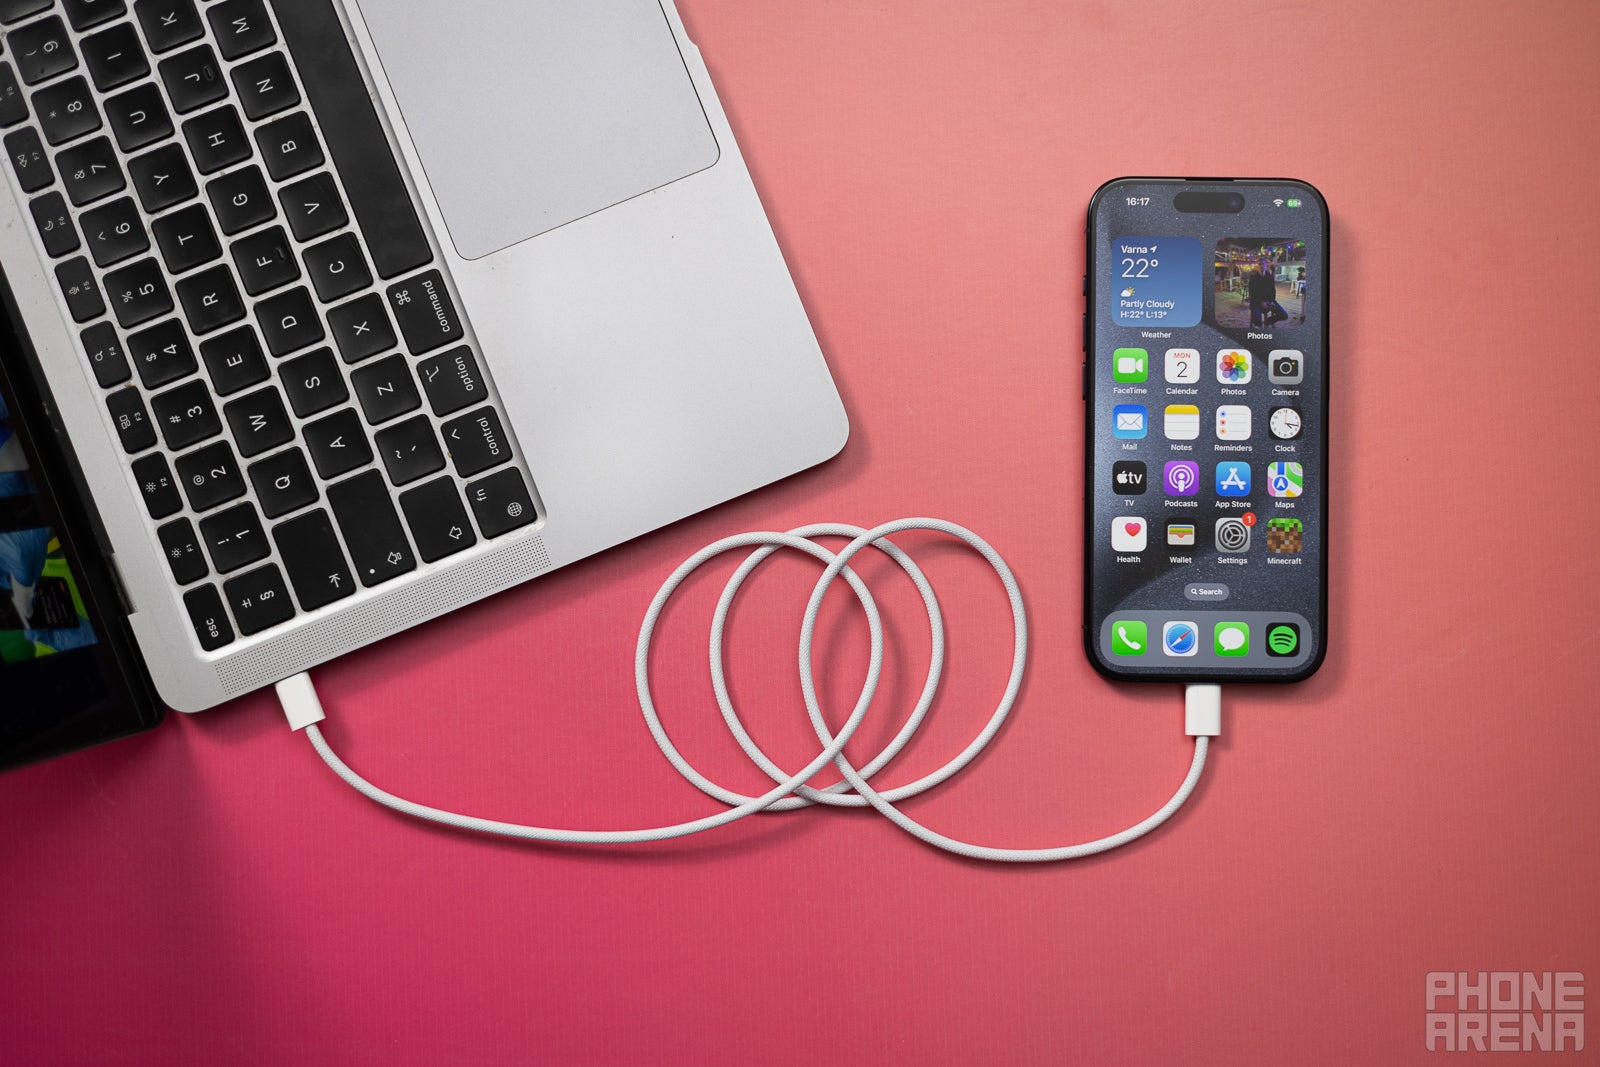 Transferring files to MacBook (Image credit - PhoneArena) - iPhone 15 Pro USB C speeds tested: USB 3 cable vs stock cable, does it make a difference?